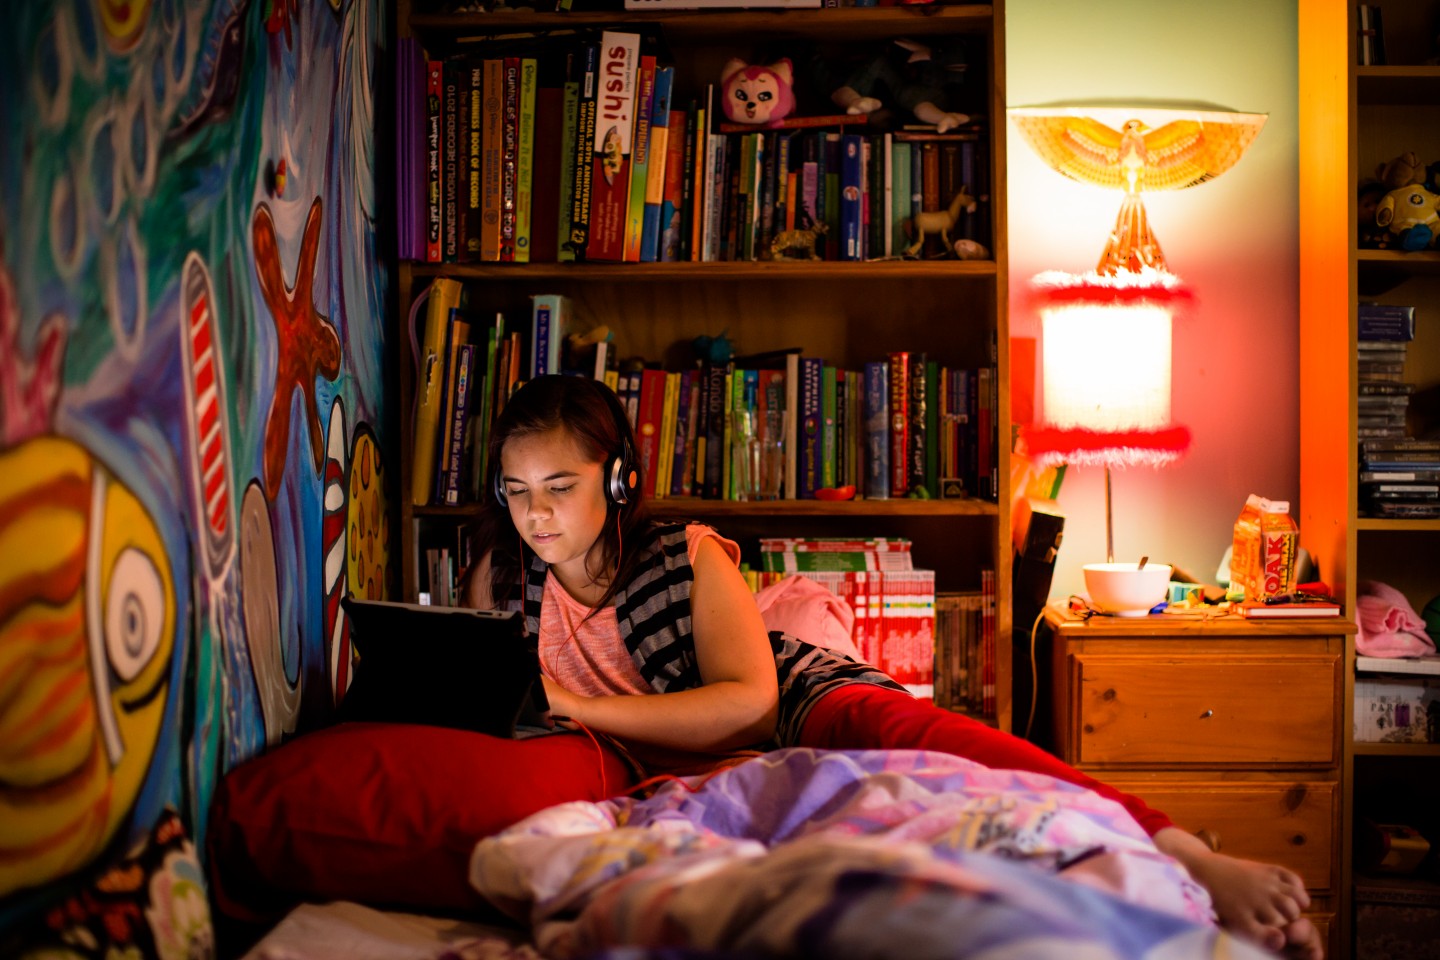 Young person on laptop in front of bookcase in bedroom.